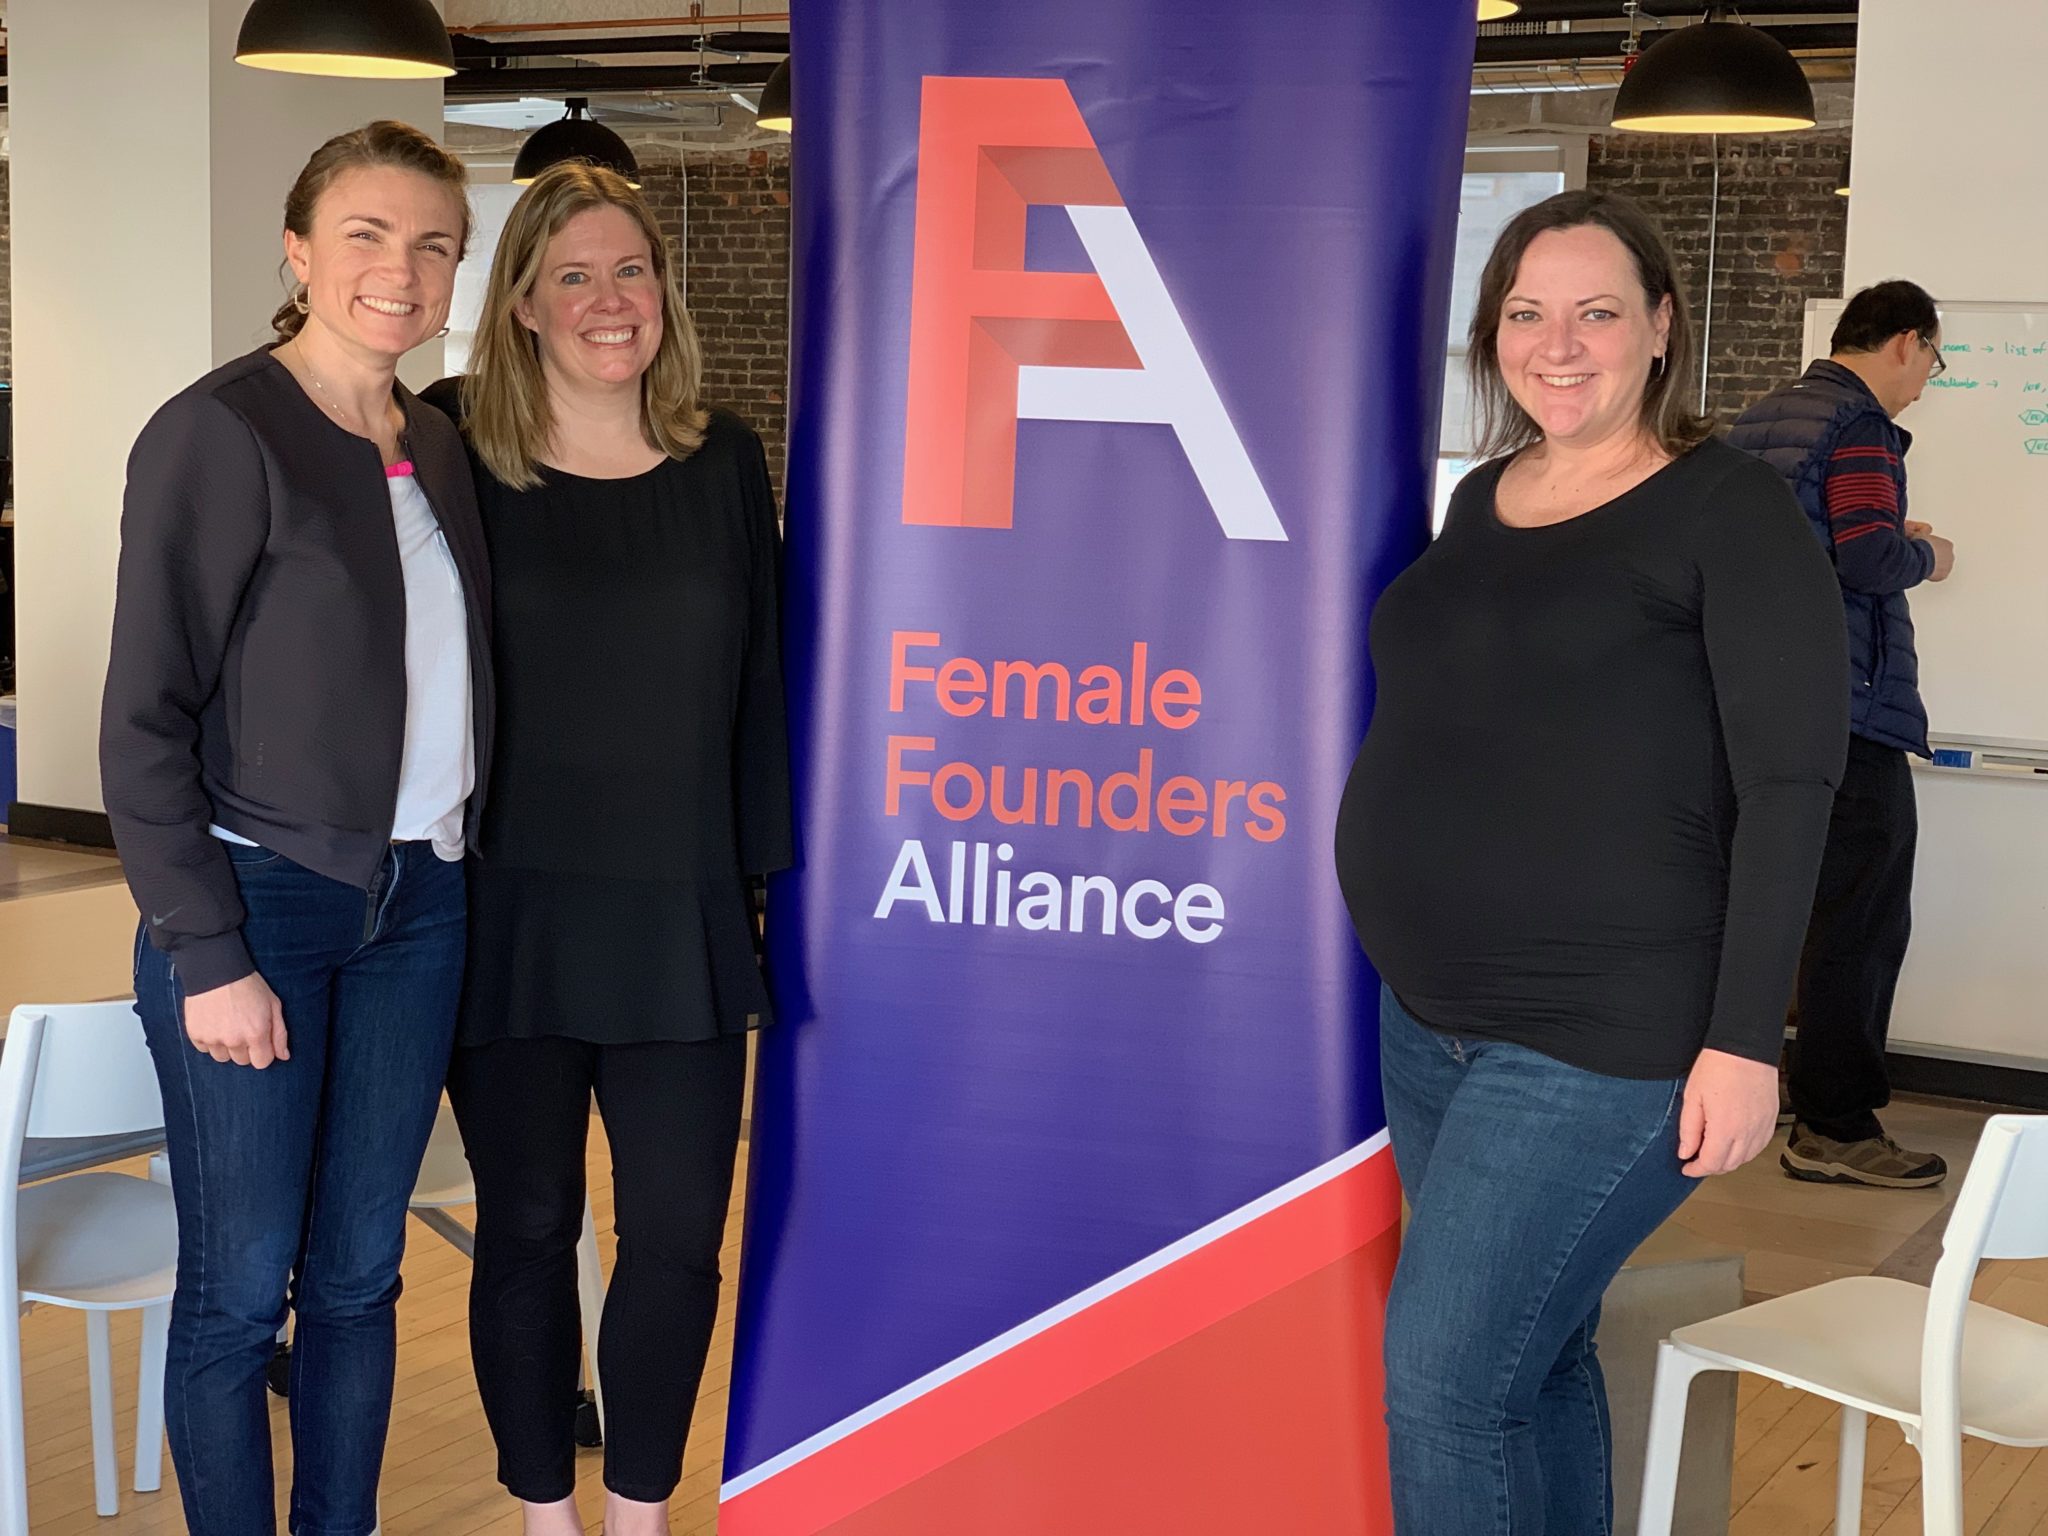 Director of Operations Rohre Titcomb, Vice President of Business Alliances Samantha Agee and CEO Leslie Feinzaig stand with a Female Founders Alliance banner